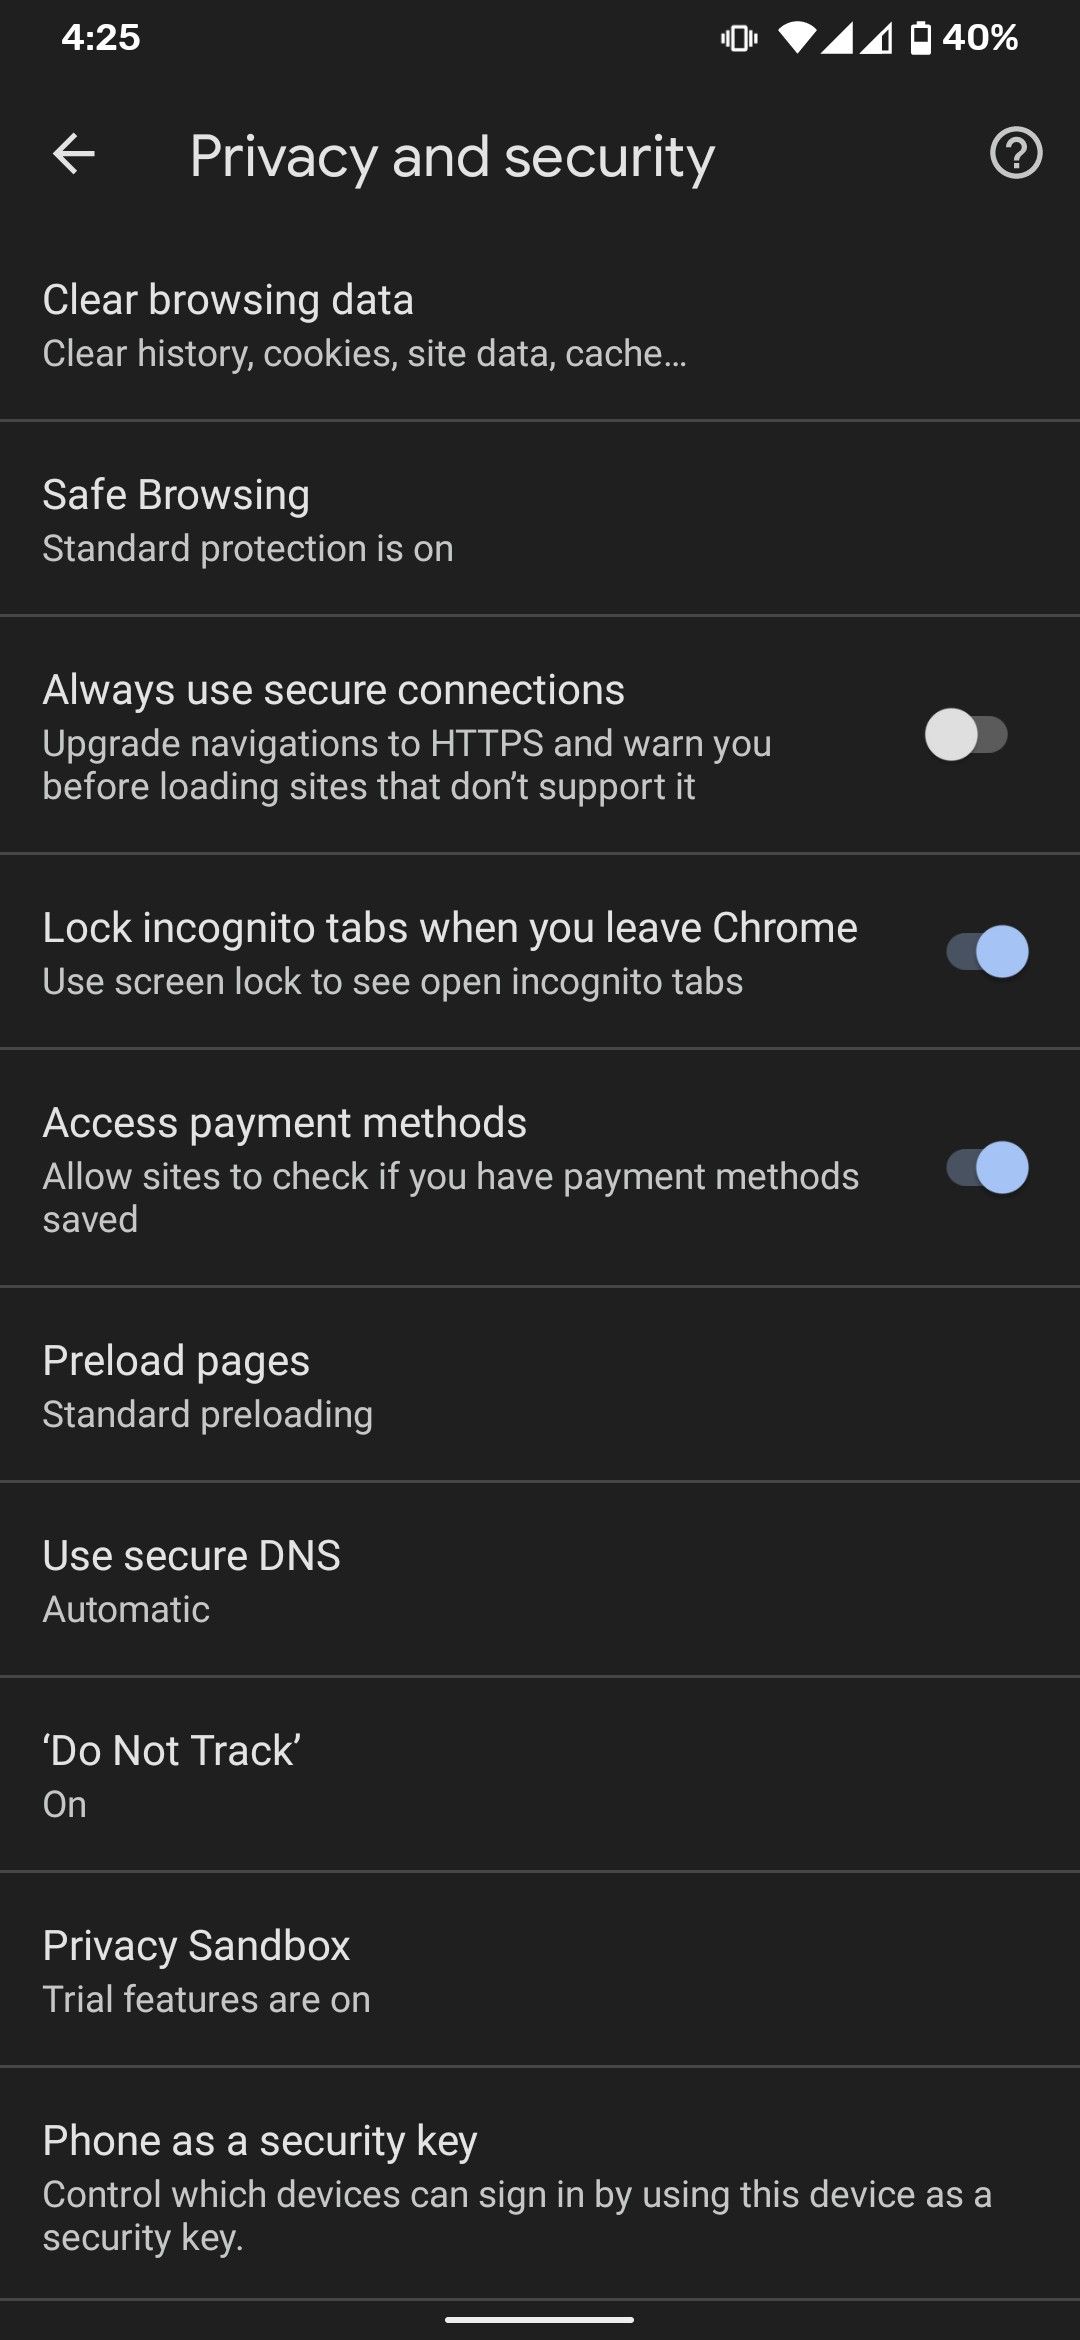 Option to lock Incognito tabs